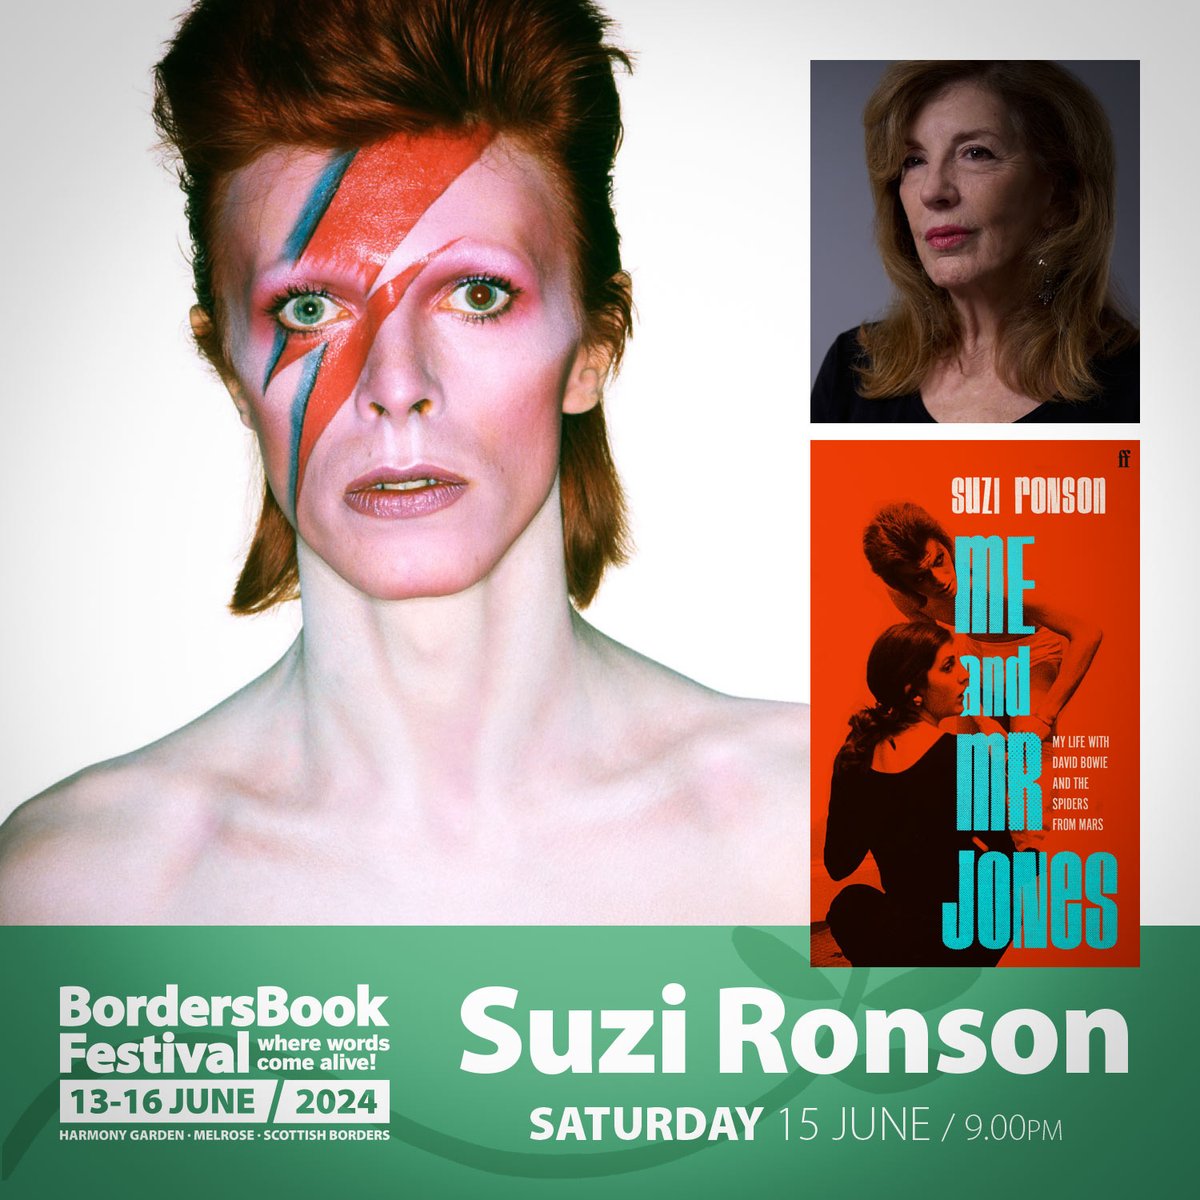 Suzi invented the Ziggy Stardust haircut and went on to influence the classic Bowie look. She married guitar legend Mick Ronson and was there when everything exploded. Are you an alligator? Don’t miss this. TICKETS: tikt.link/suzironson